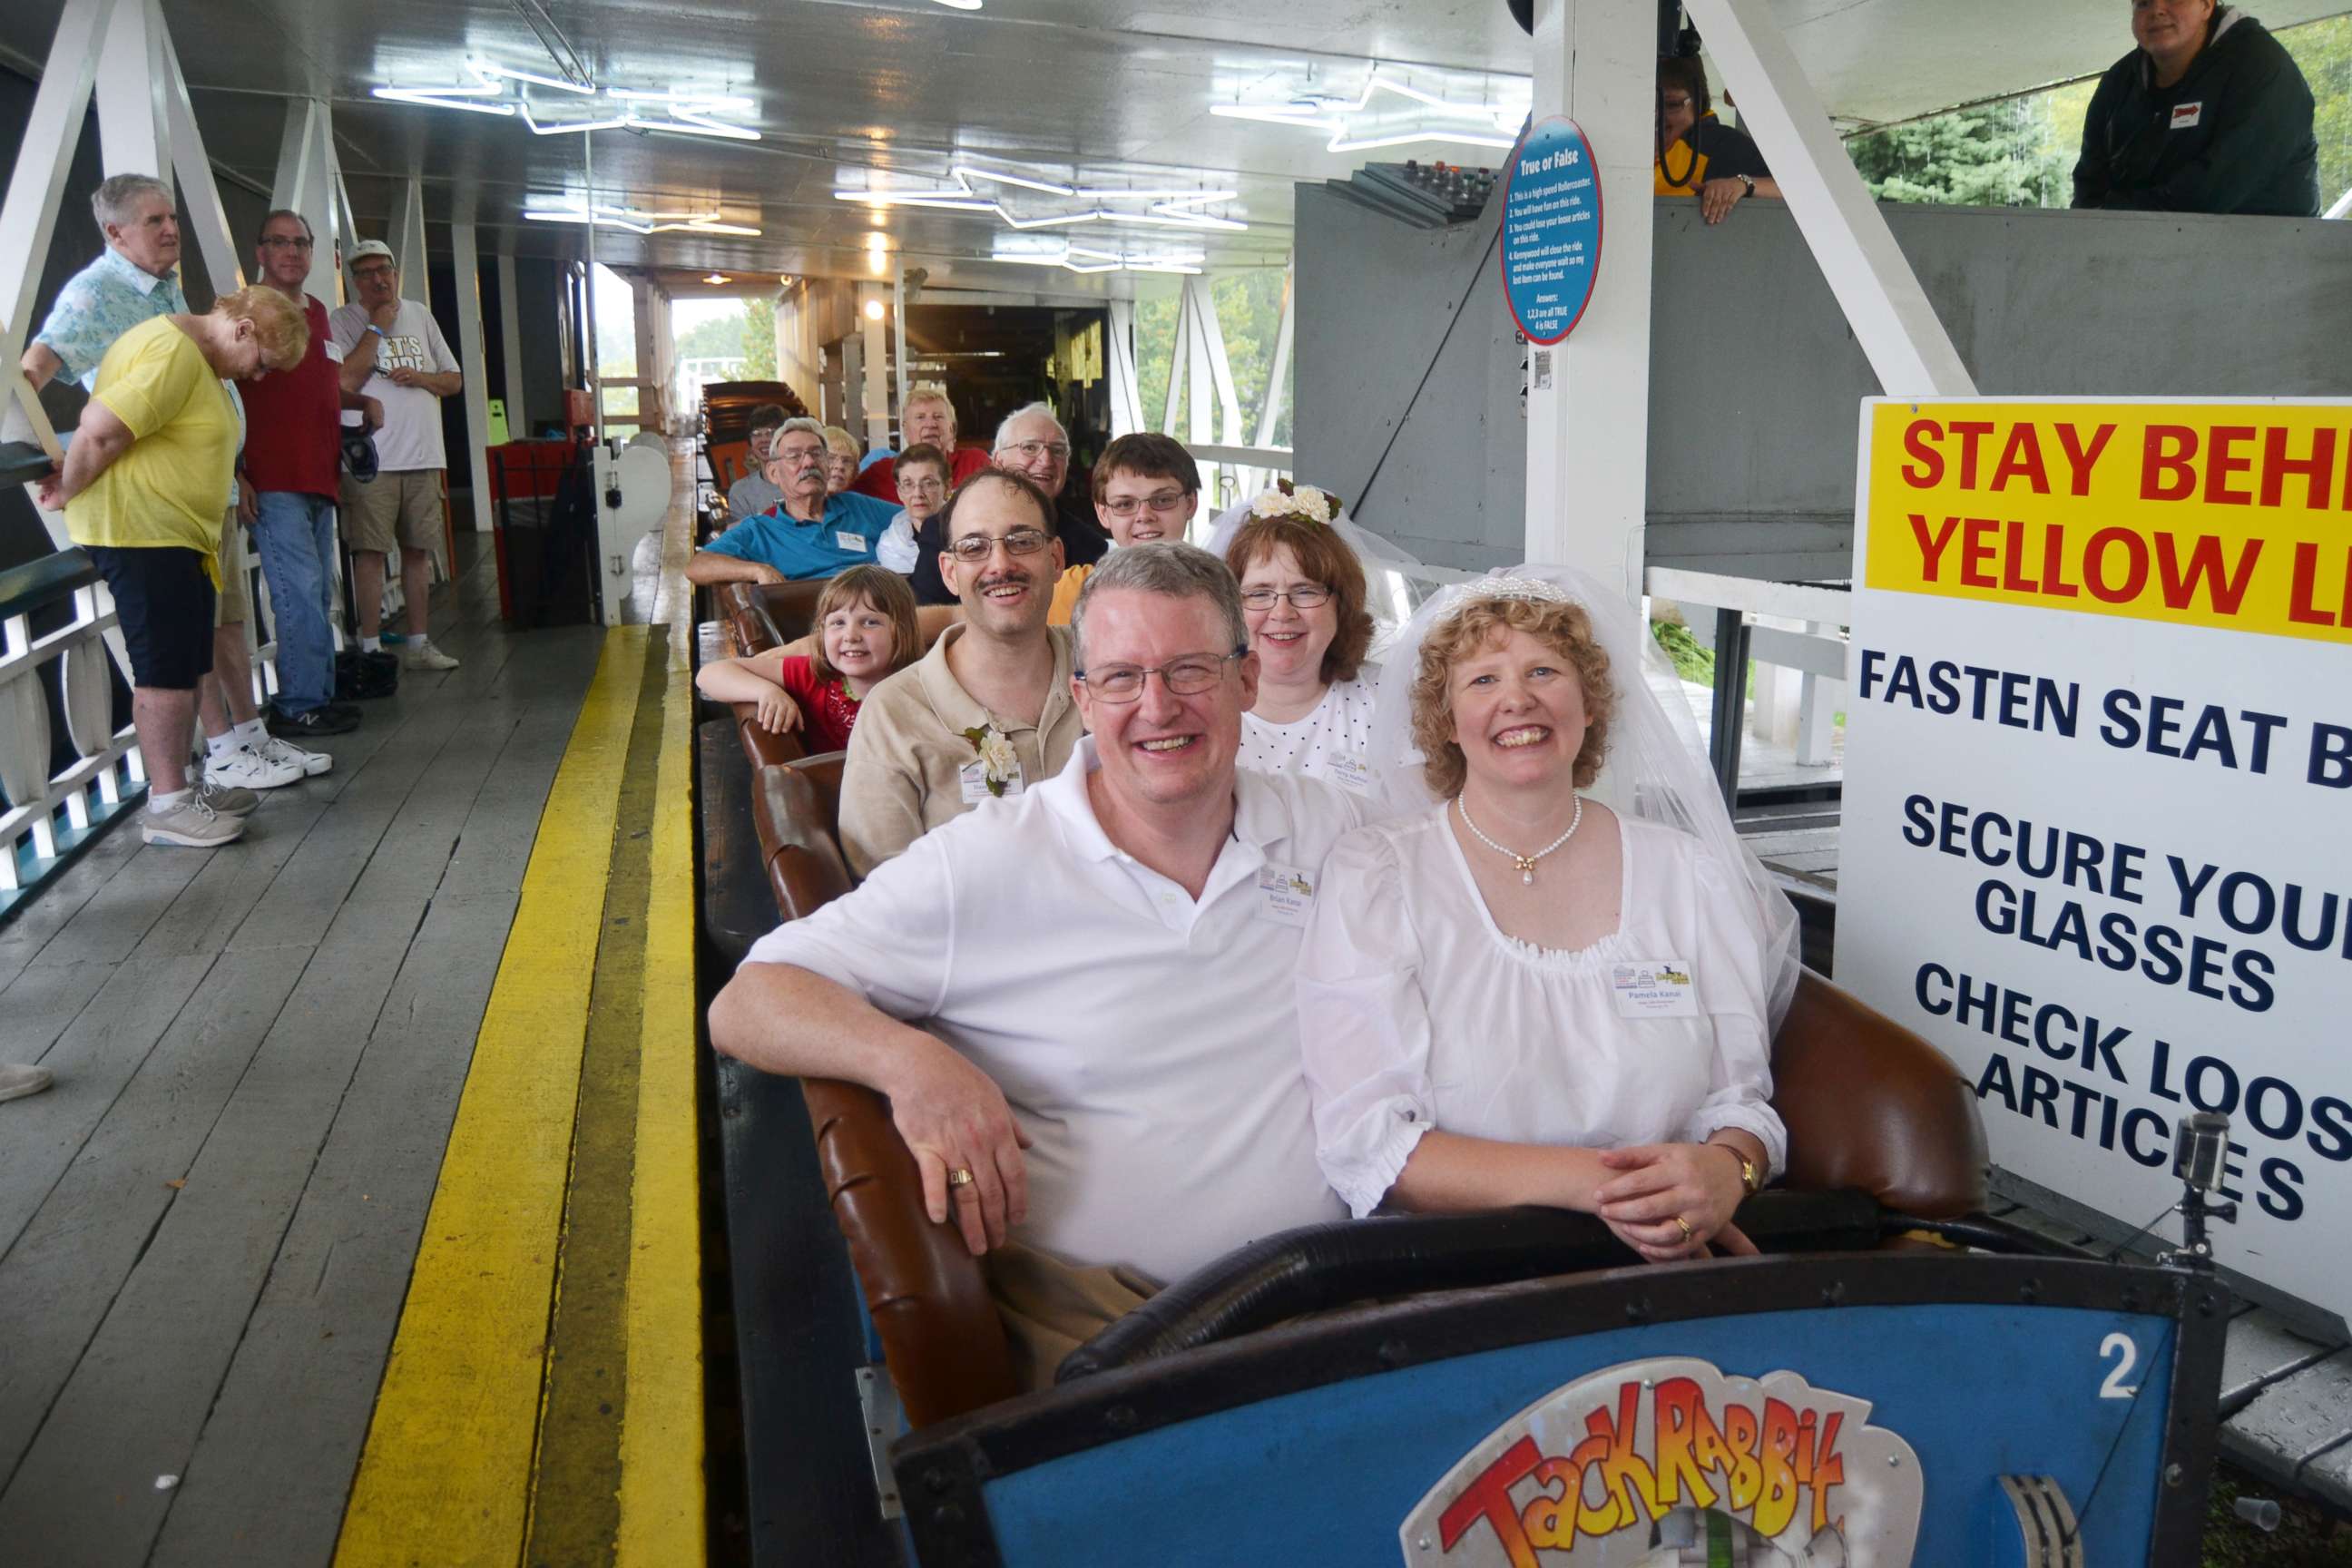 PHOTO: Brian and Pam Kanai renewed their wedding vows on the Jack Rabbit roller coaster at Kennywood Park in West Mifflin, Pennsylvania.